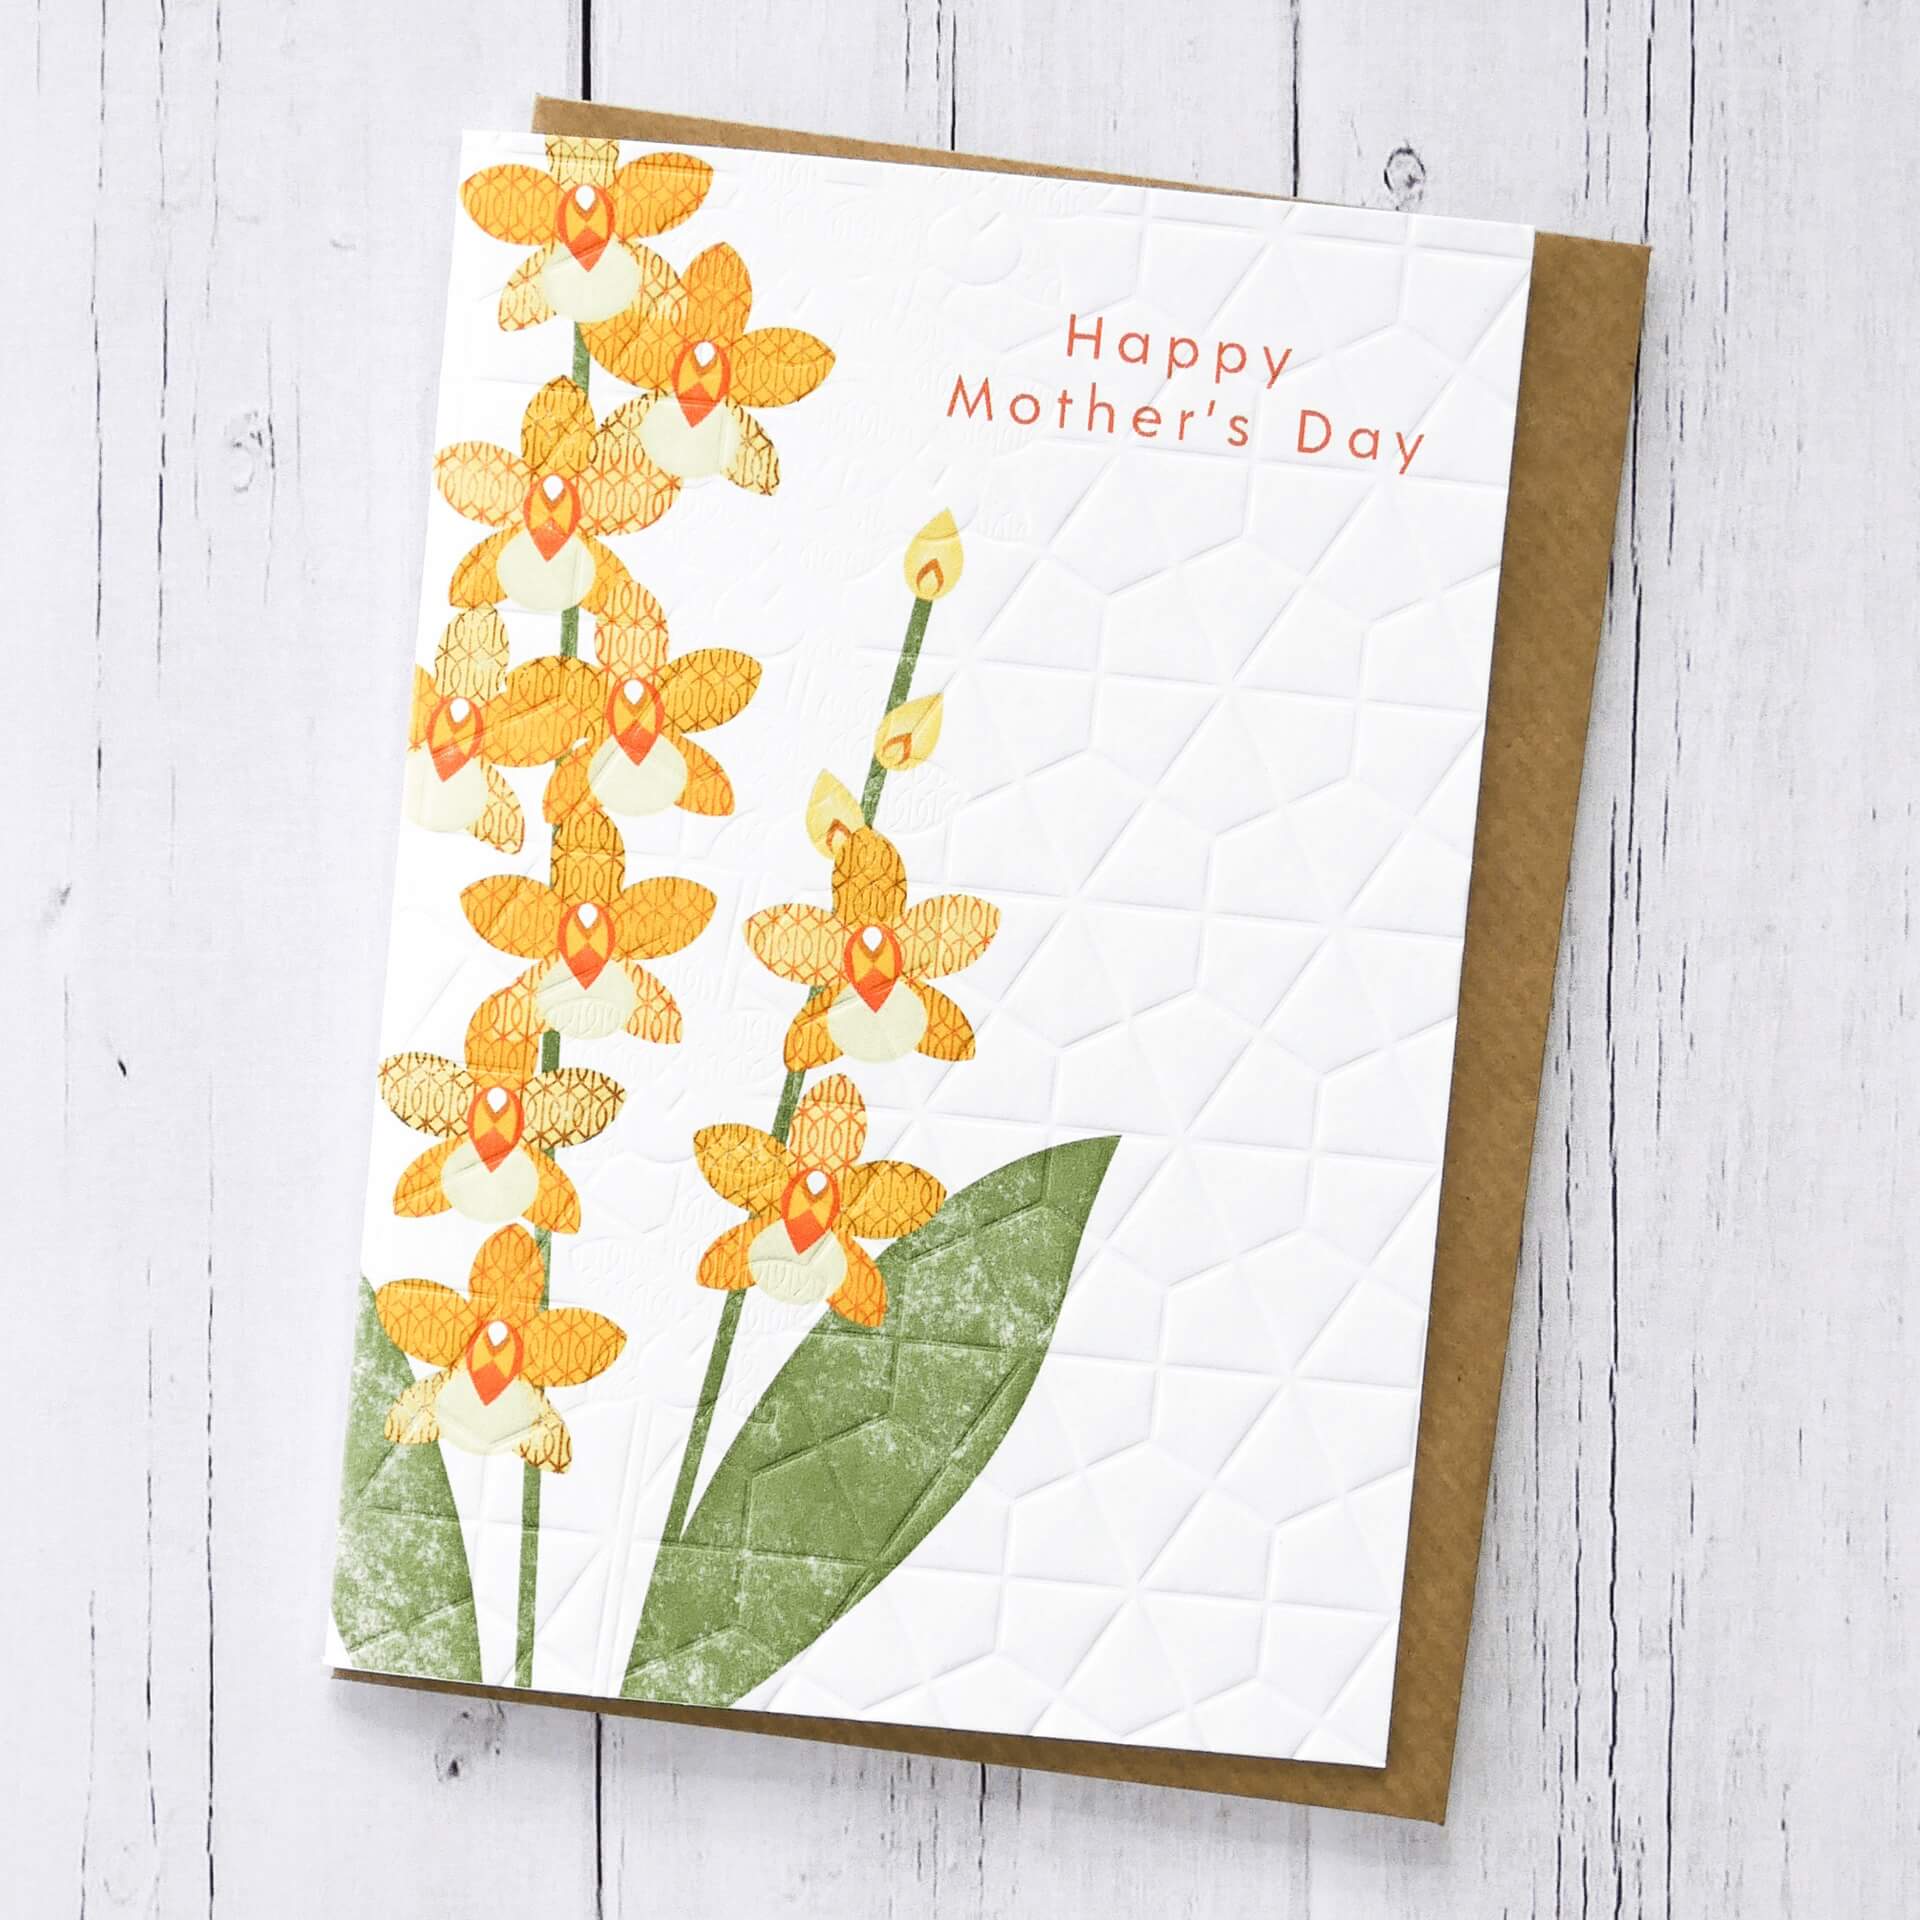 Ash Leaf Printing Greetings Card Happy Mothers Day (Embossed) - Yellow Flower Card